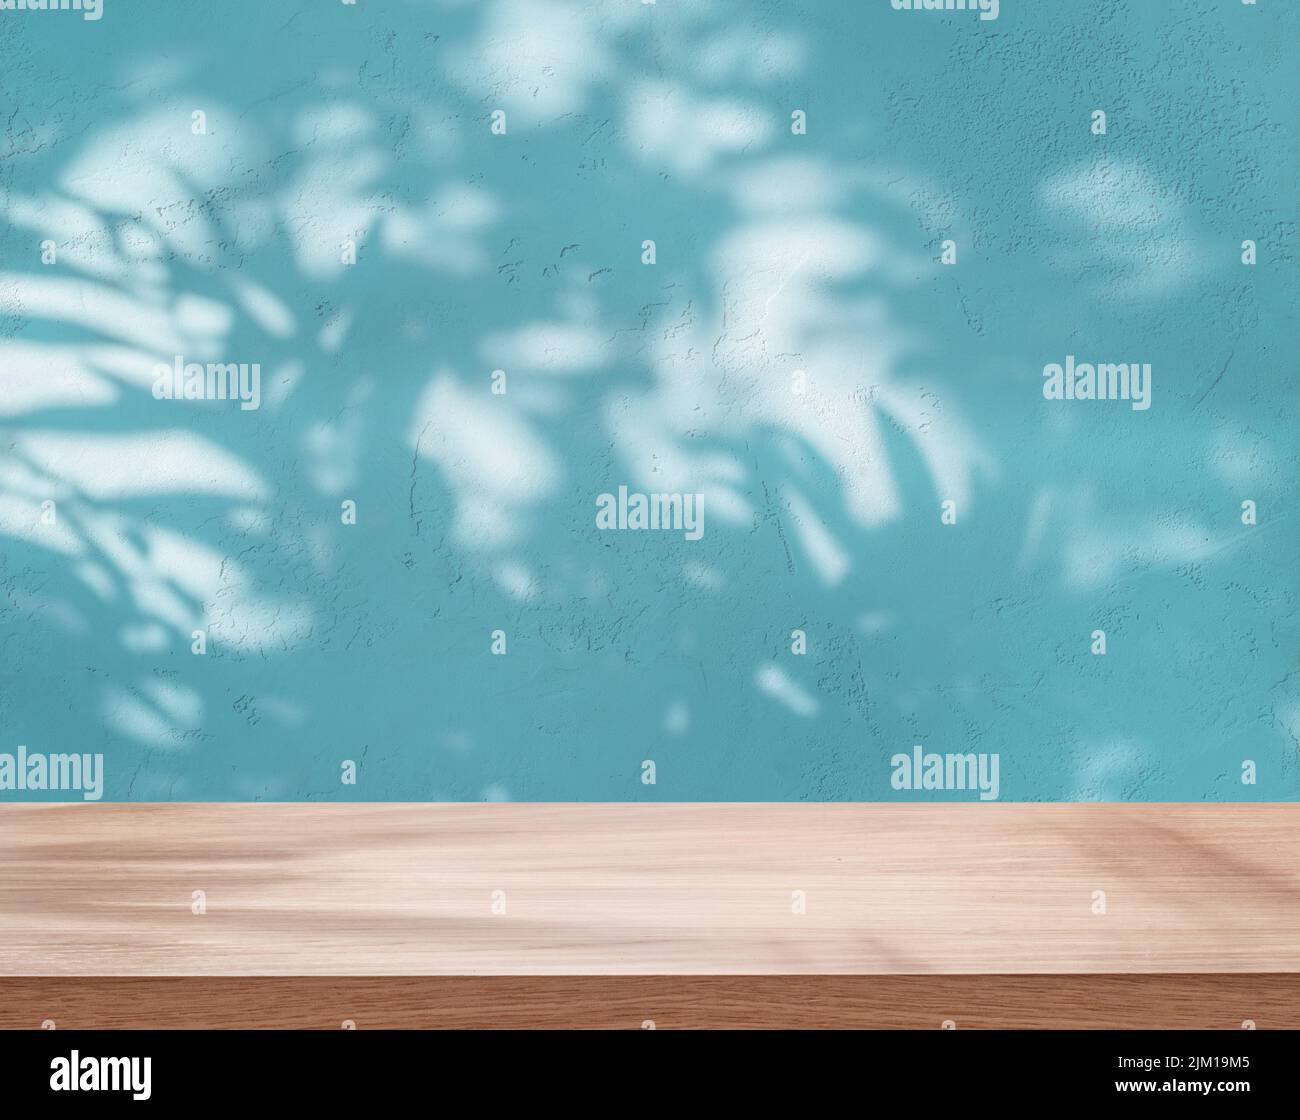 Empty board or table top and blue stucco pattern wall with leaf shadows. Place for your product display. Stock Photo